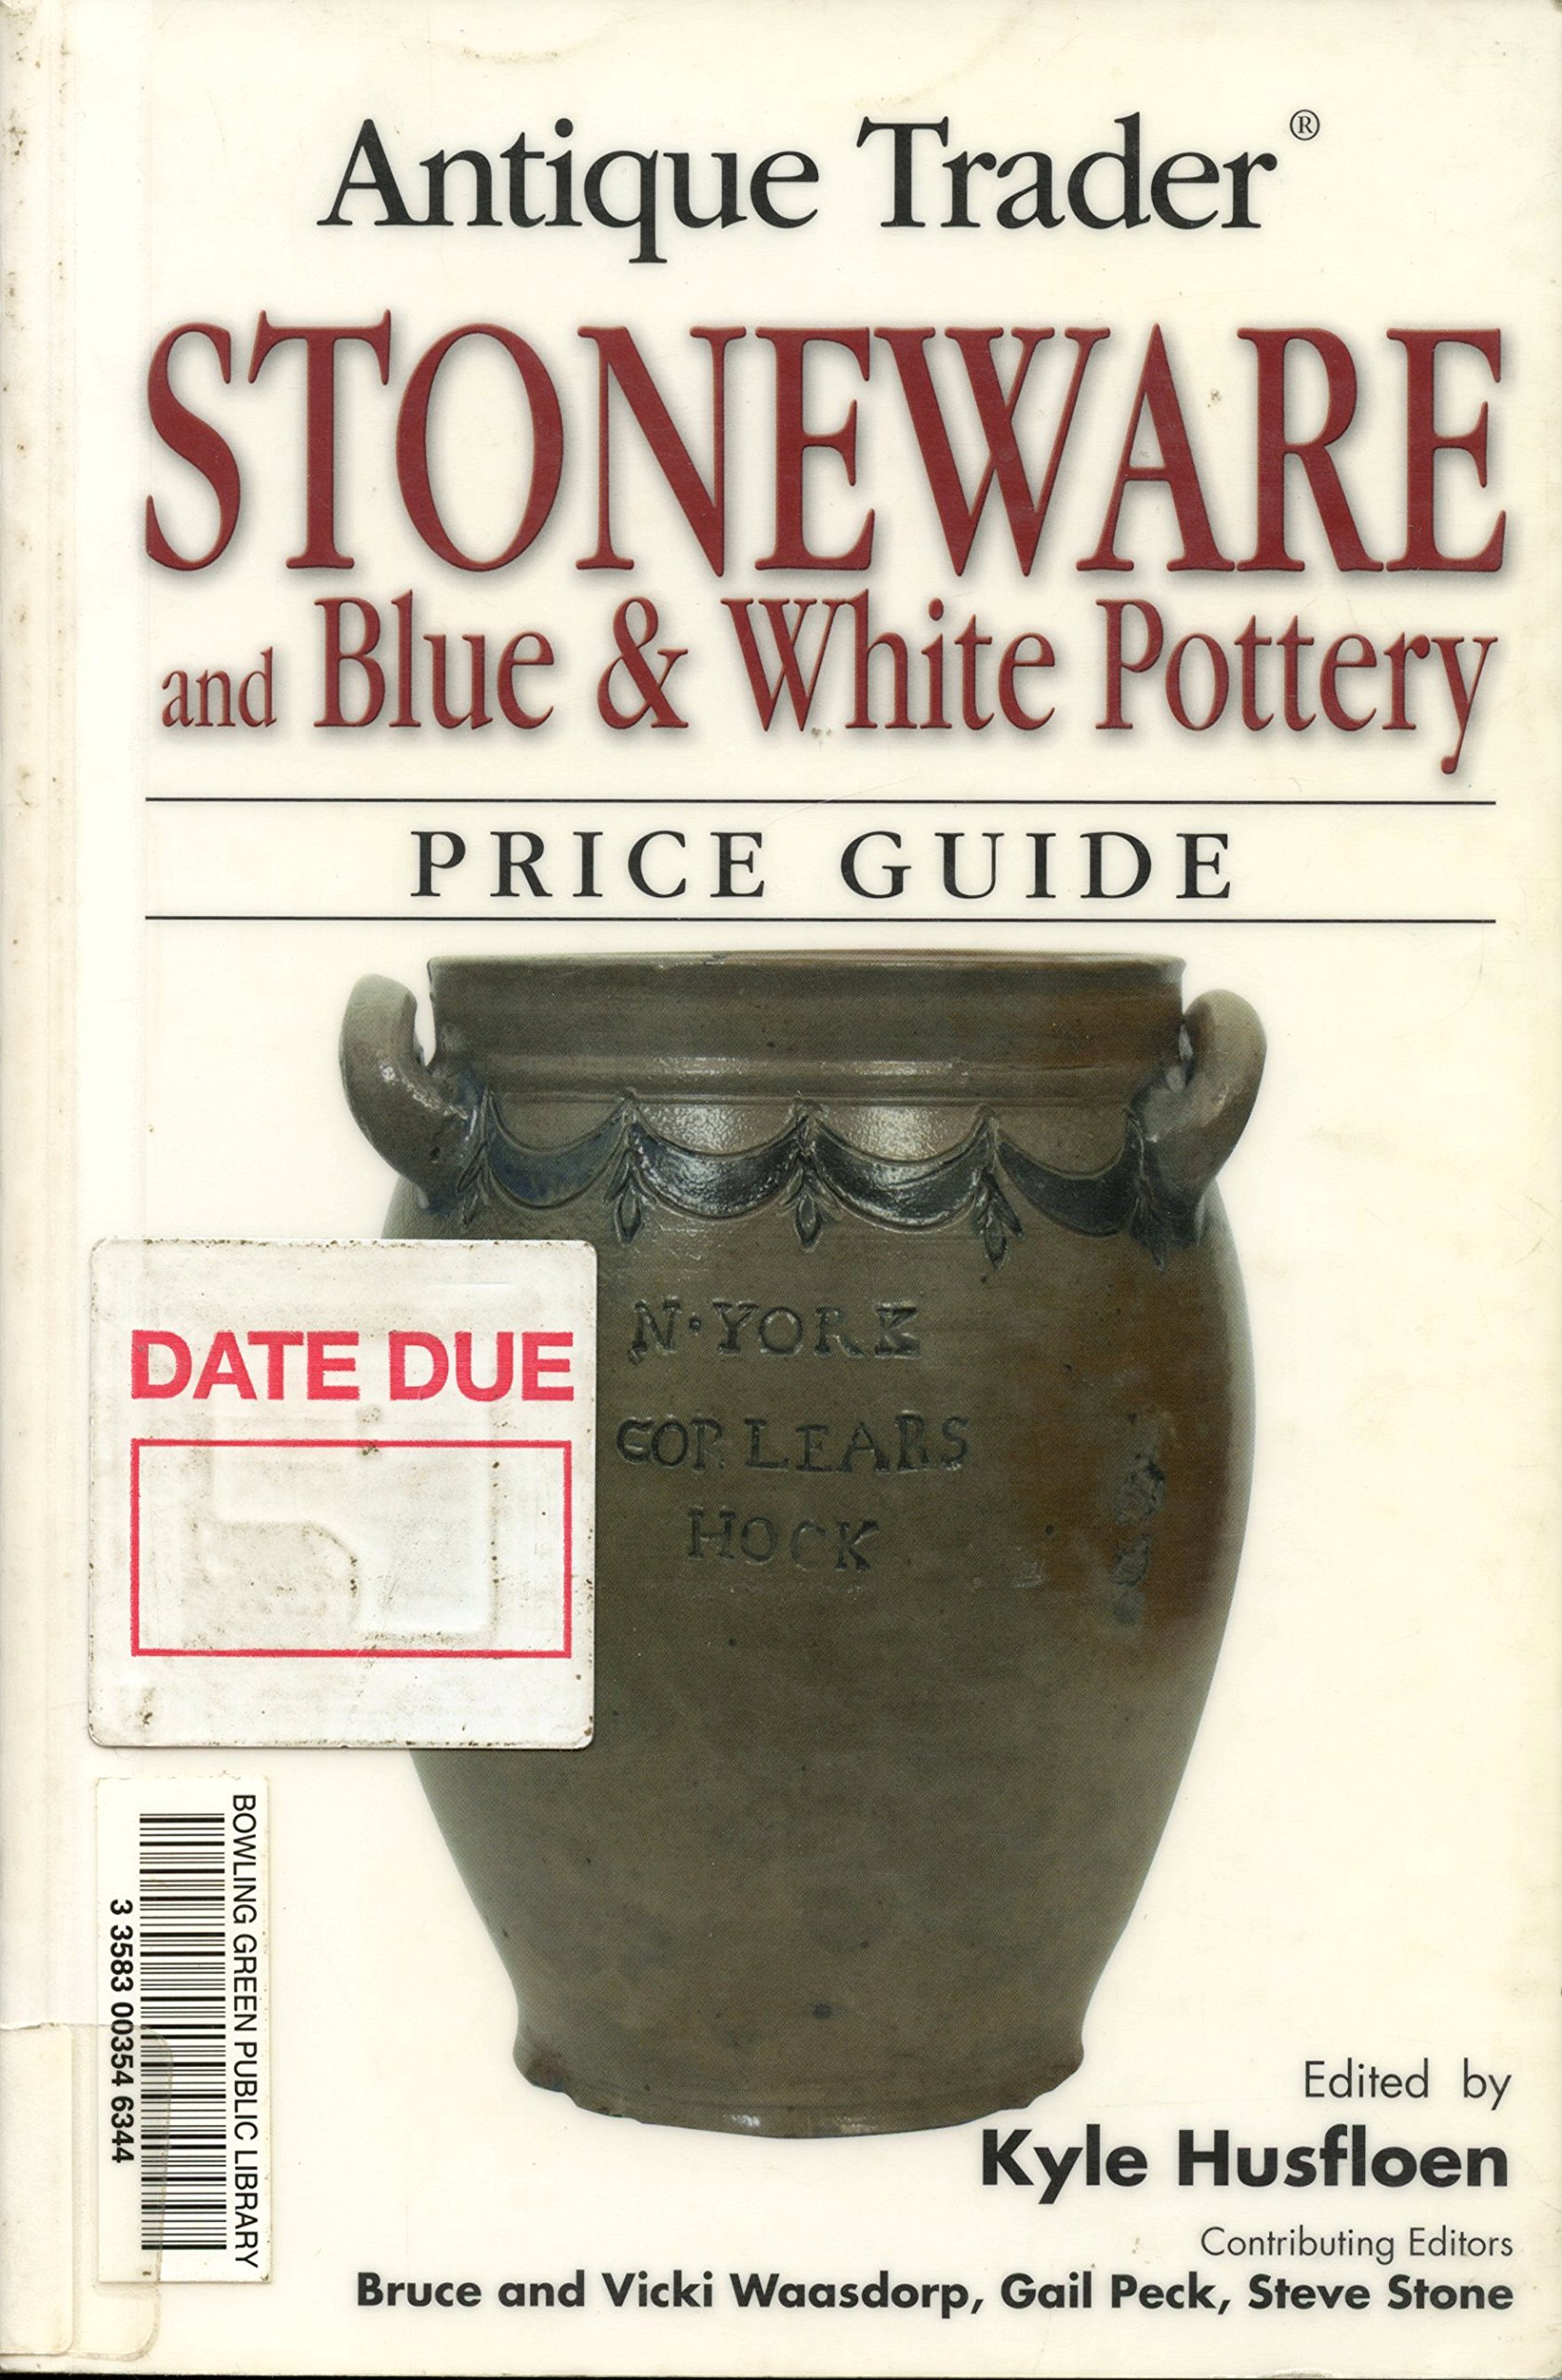 Antique Trader Stoneware and Blue & White Pottery Price Guide